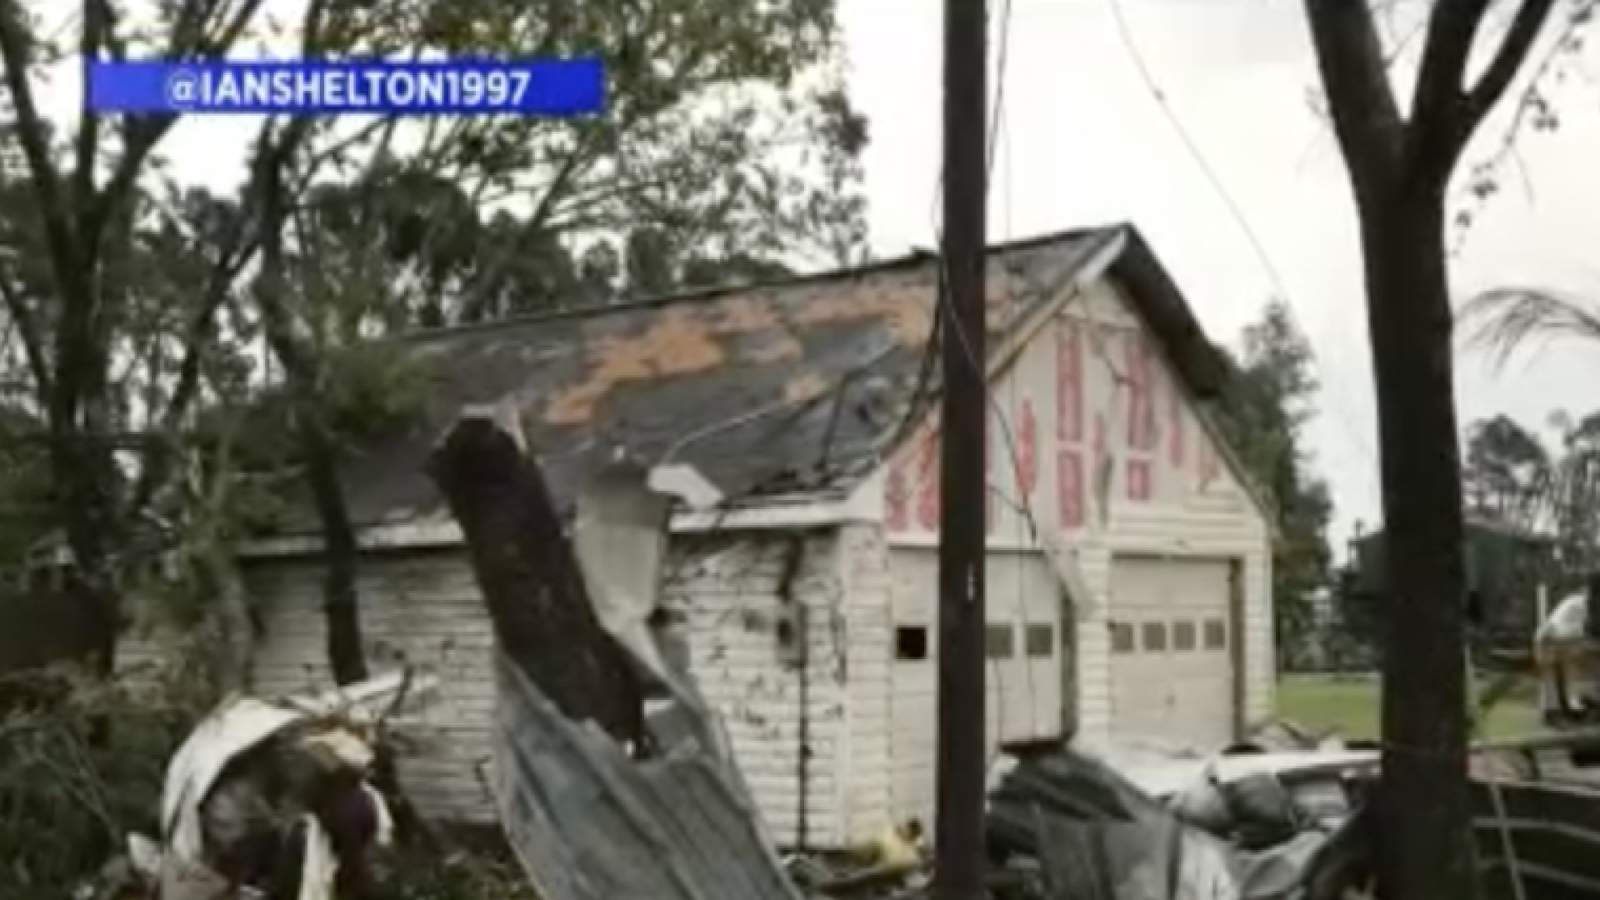 3 killed, at least 20 injured after tornado rips through Onalaska in Polk County Wednesday